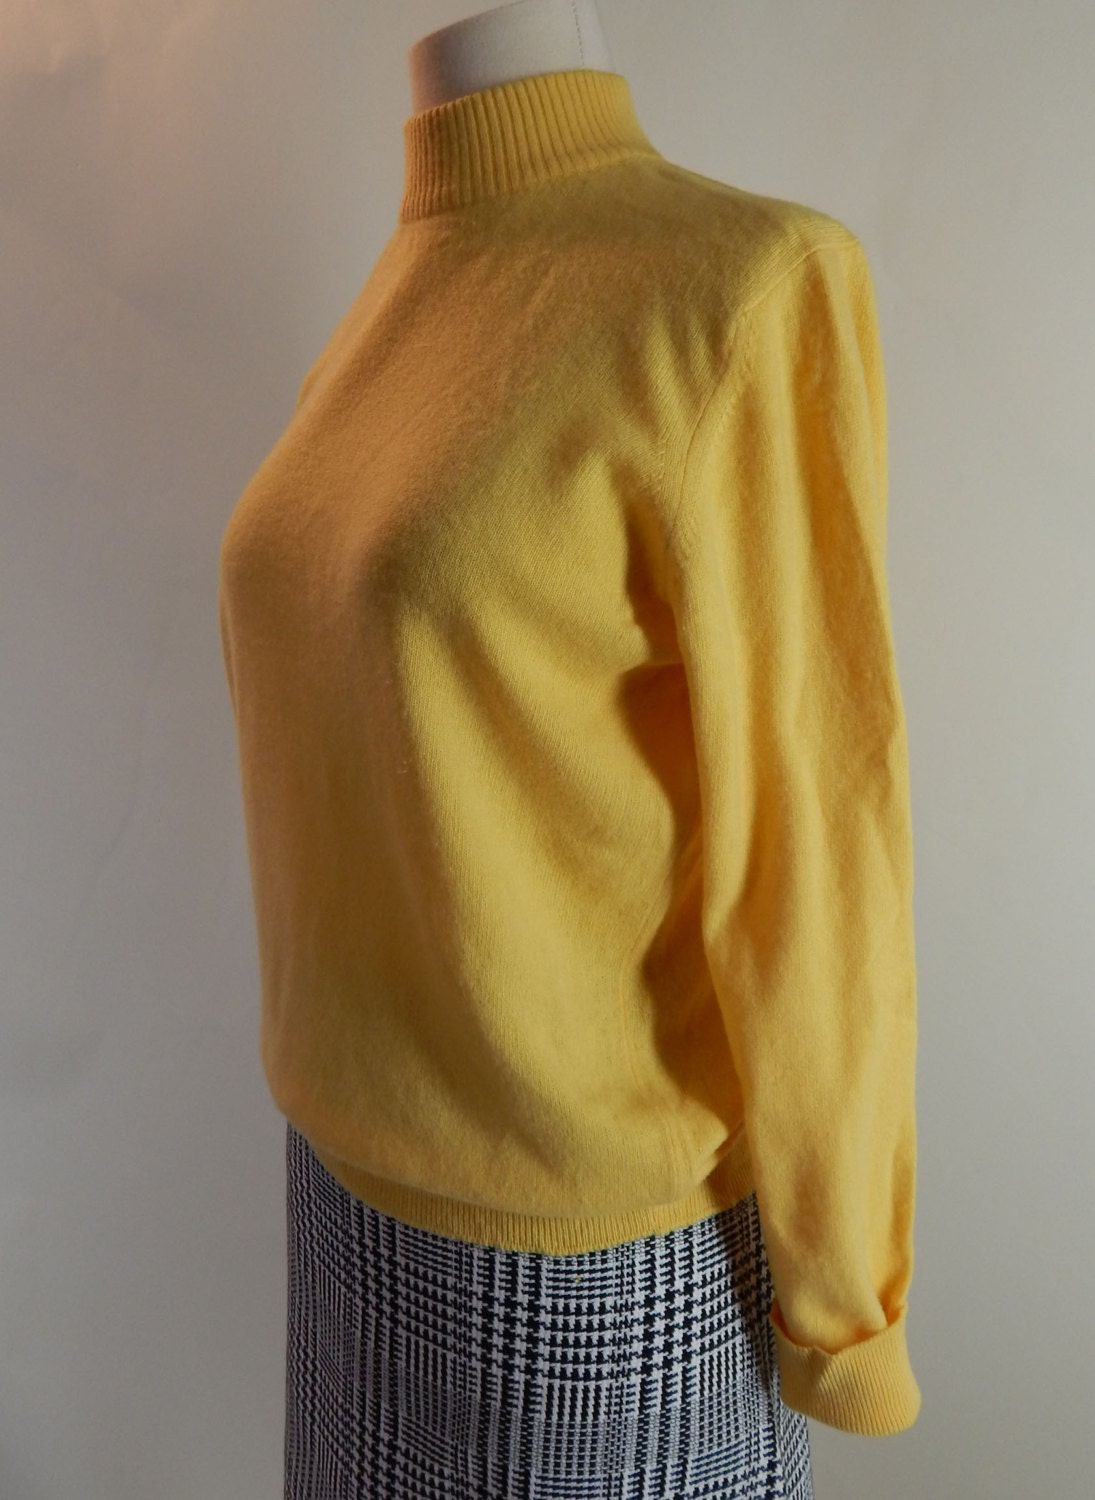 1970s Yellow Cashmere Turtleneck Sweater made in Scotland by Lyle and Scott.  size Medium - EndlessAlley